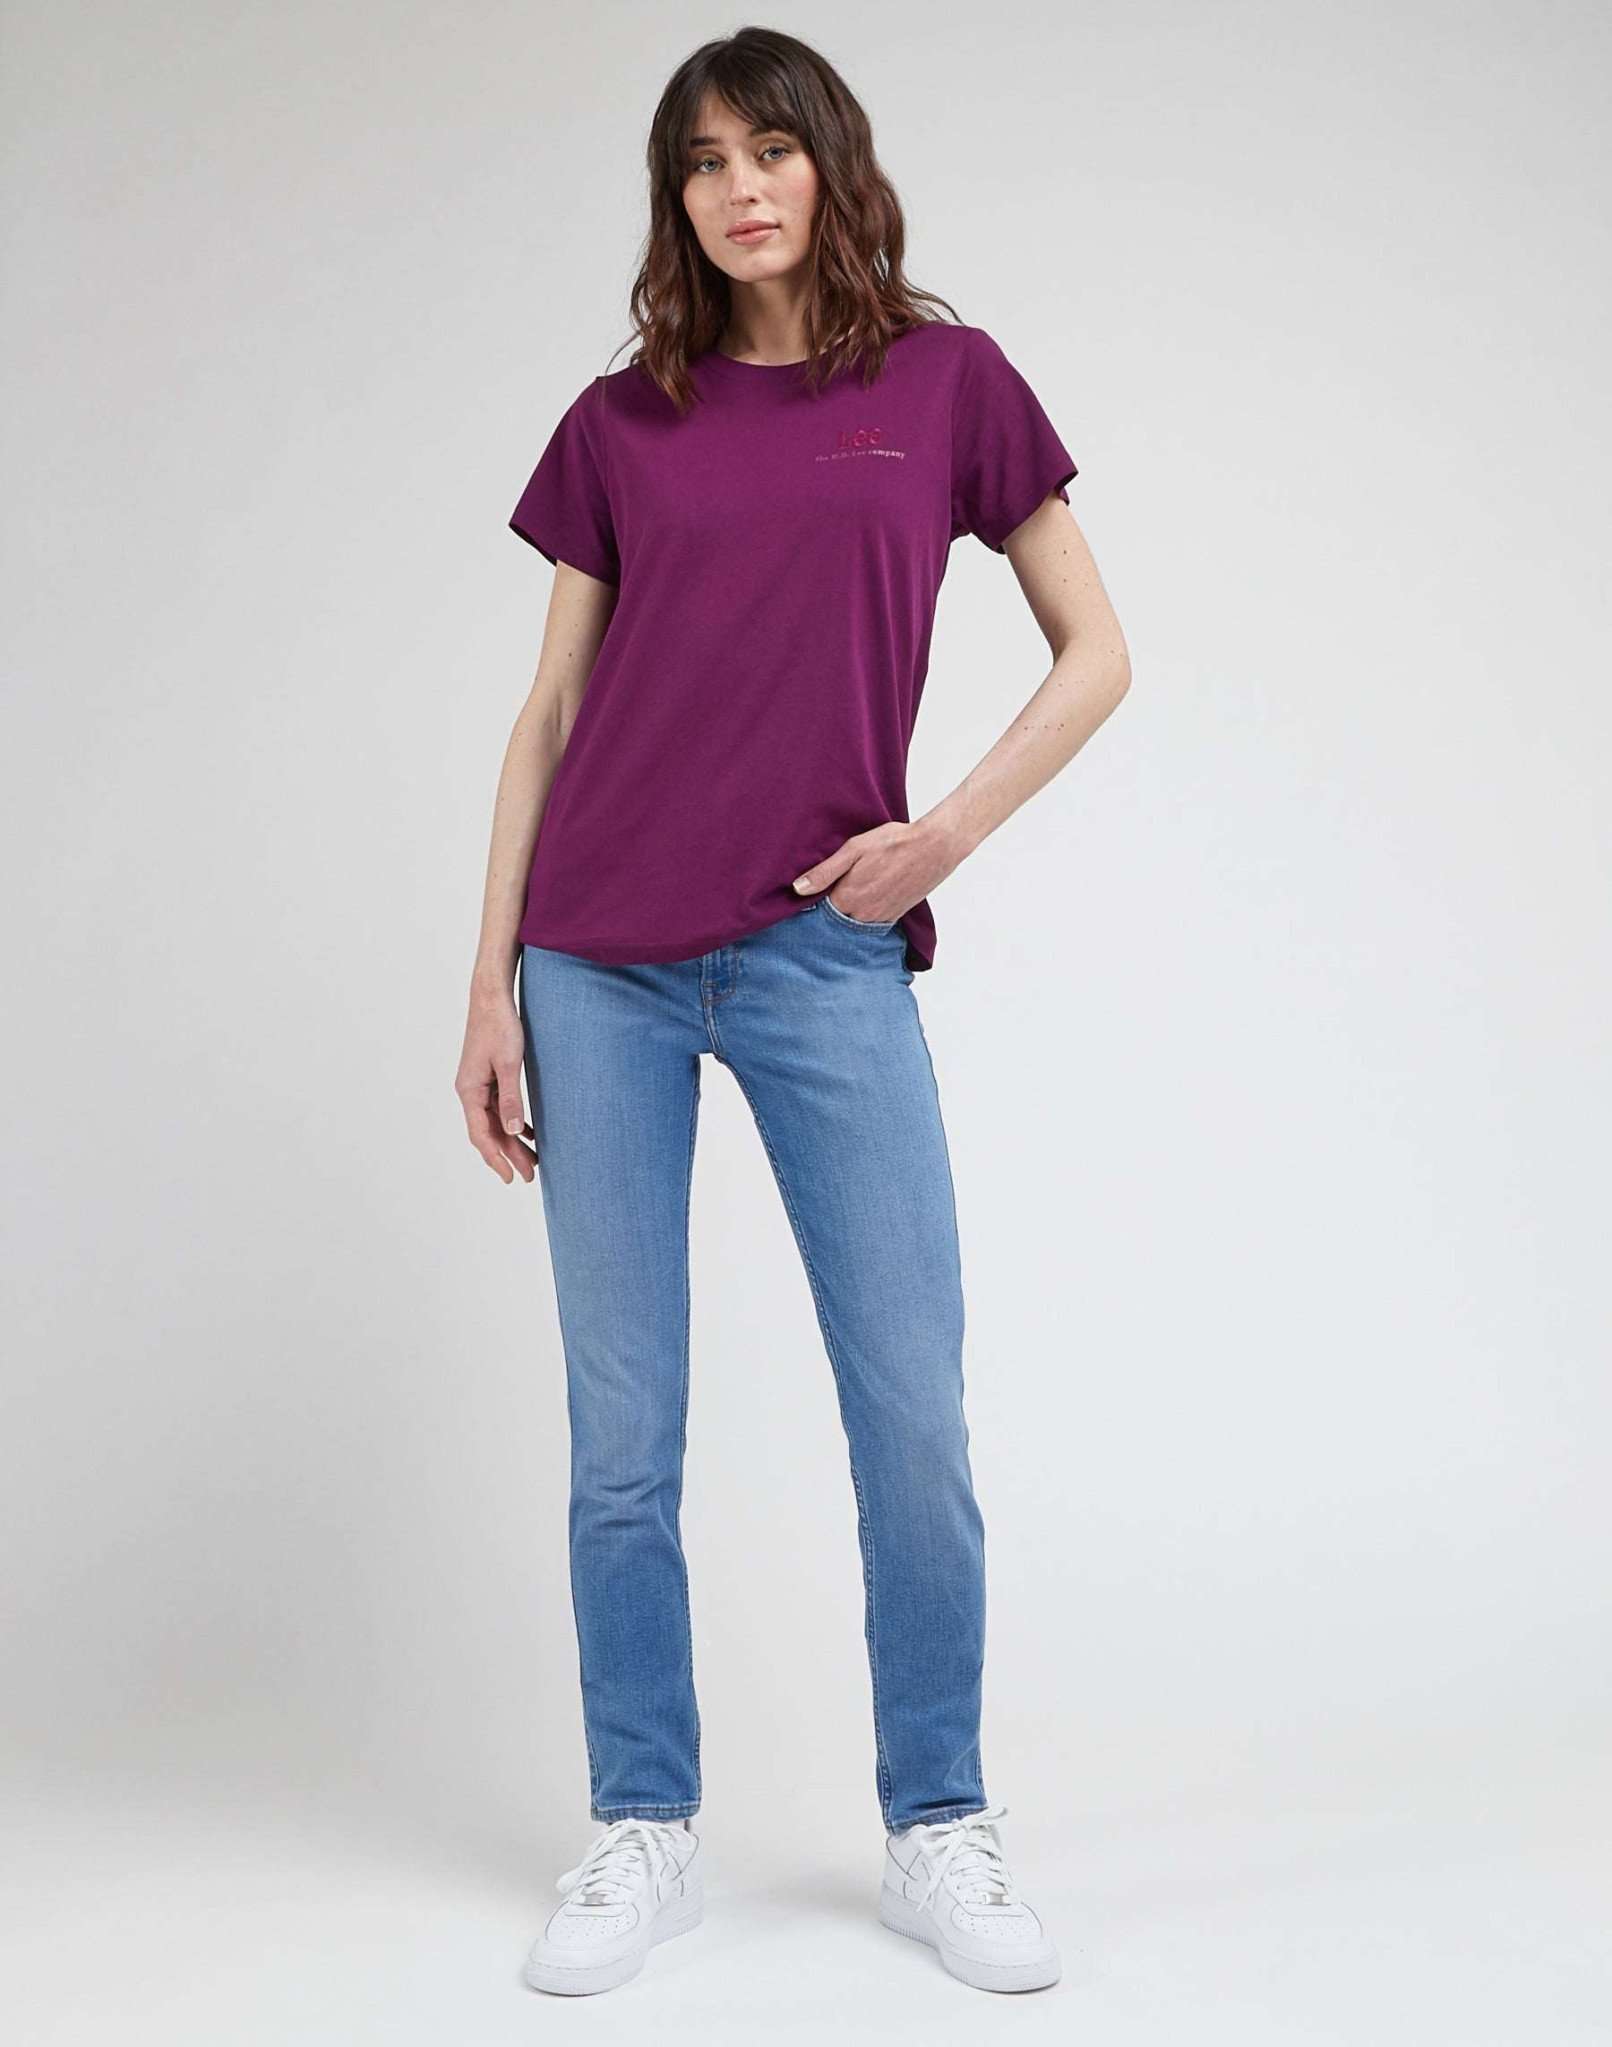 Small Logo Tee in Foxy Violet T-Shirts Lee   